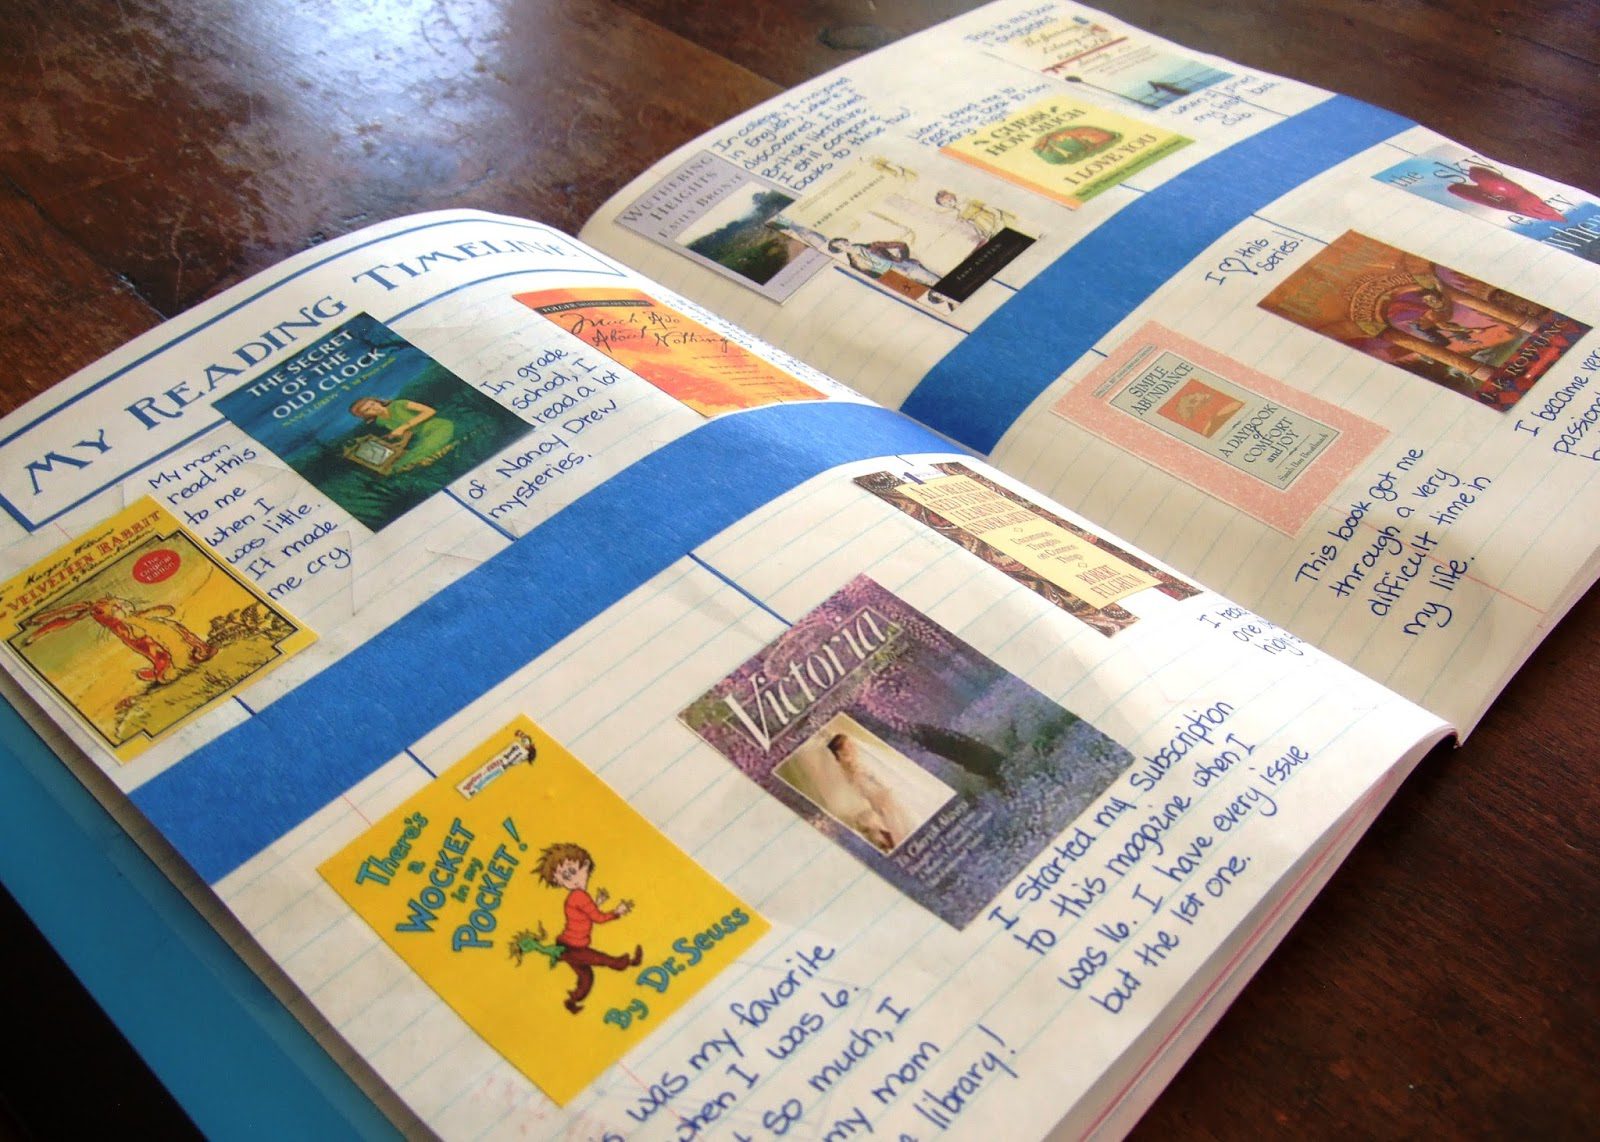 Two pages of a notebook with book covers and notes to form a reading timeline